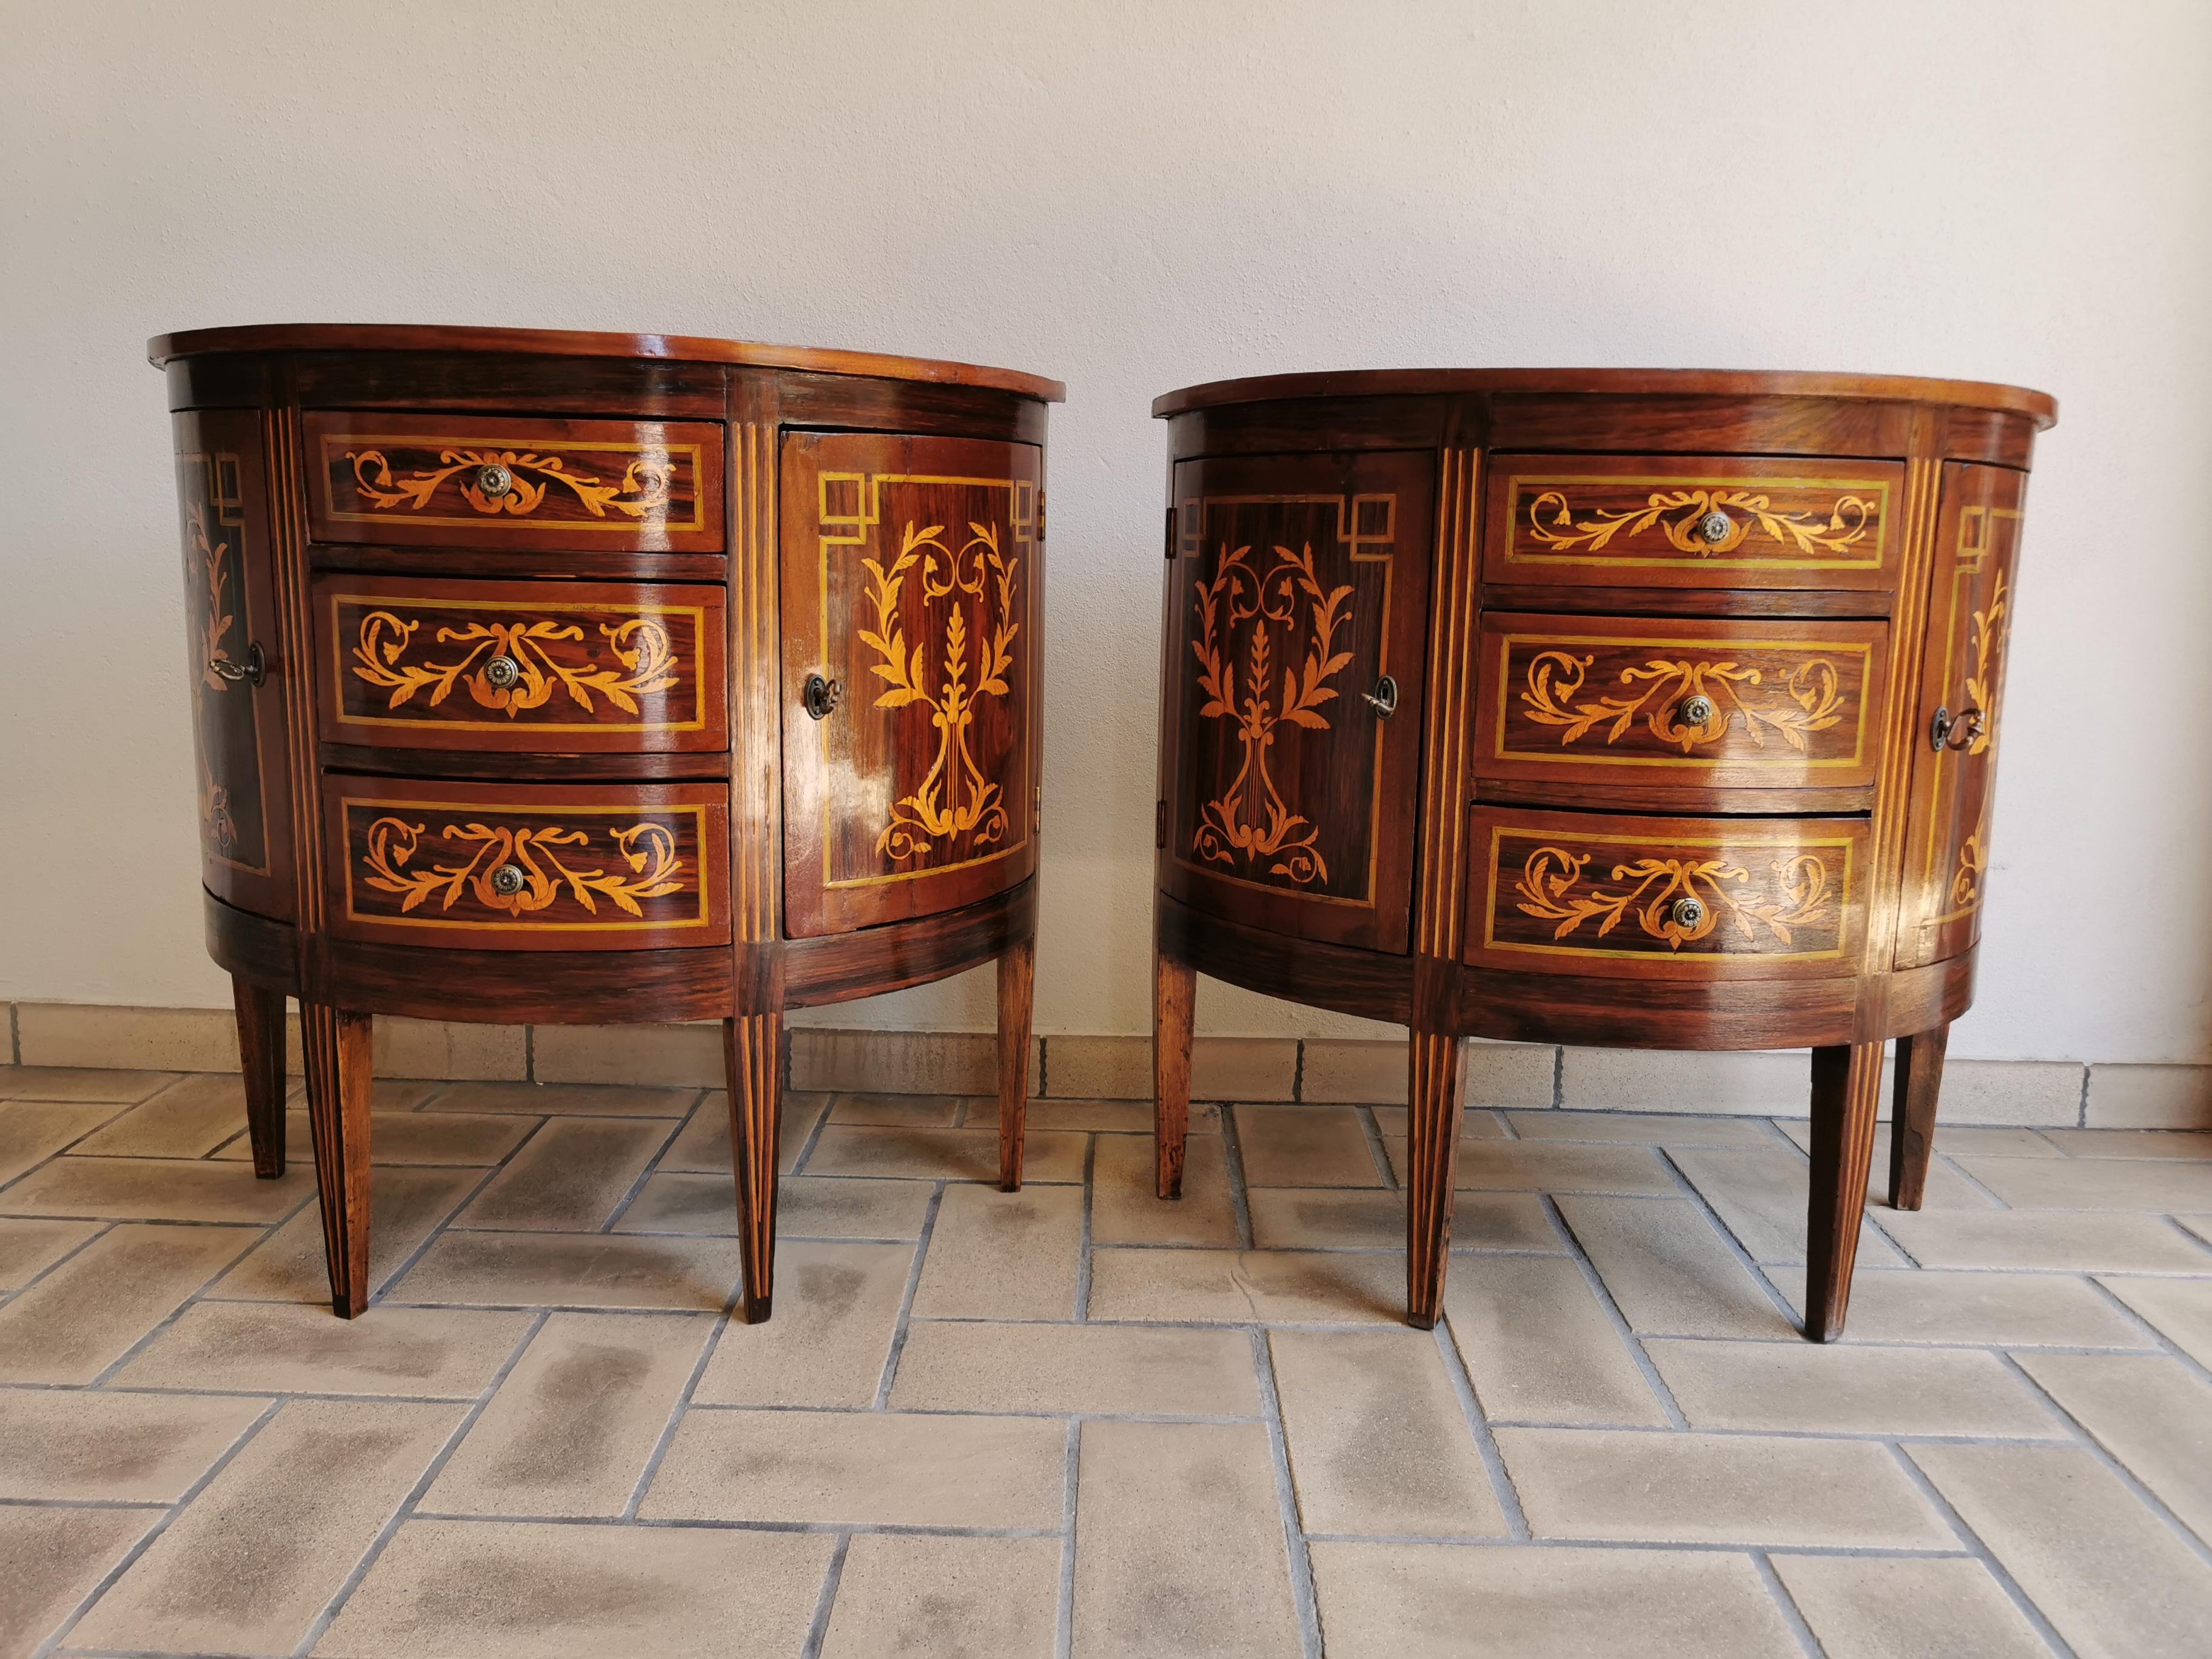 Pair of 19th century Louis XVI Marquetry side commodes has been restored 
particular pieces richly inlaid all around the commode
eye catching pieces good for saloons 
39x84x82H cm 
there is vip fast shipping closer cities
seller location :